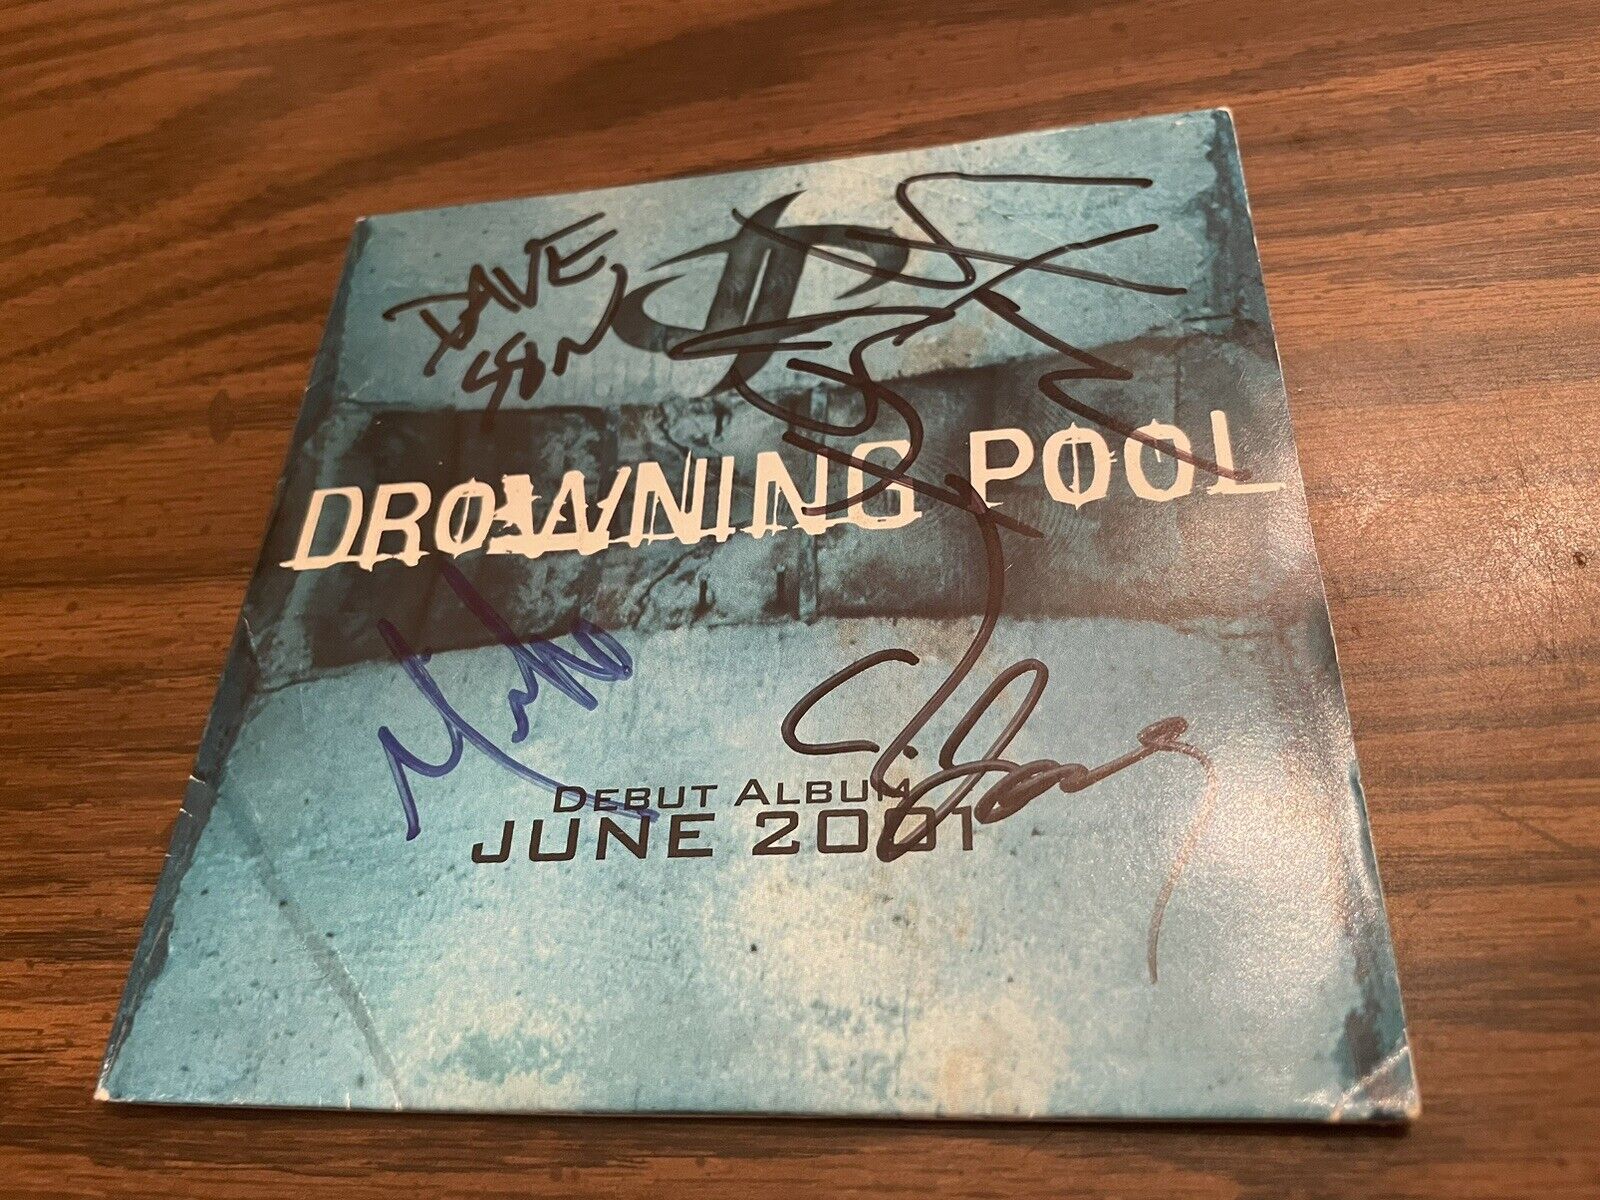 Dave Williams Drowning Pool Band Signed/Autographed Debut Album Promo CD